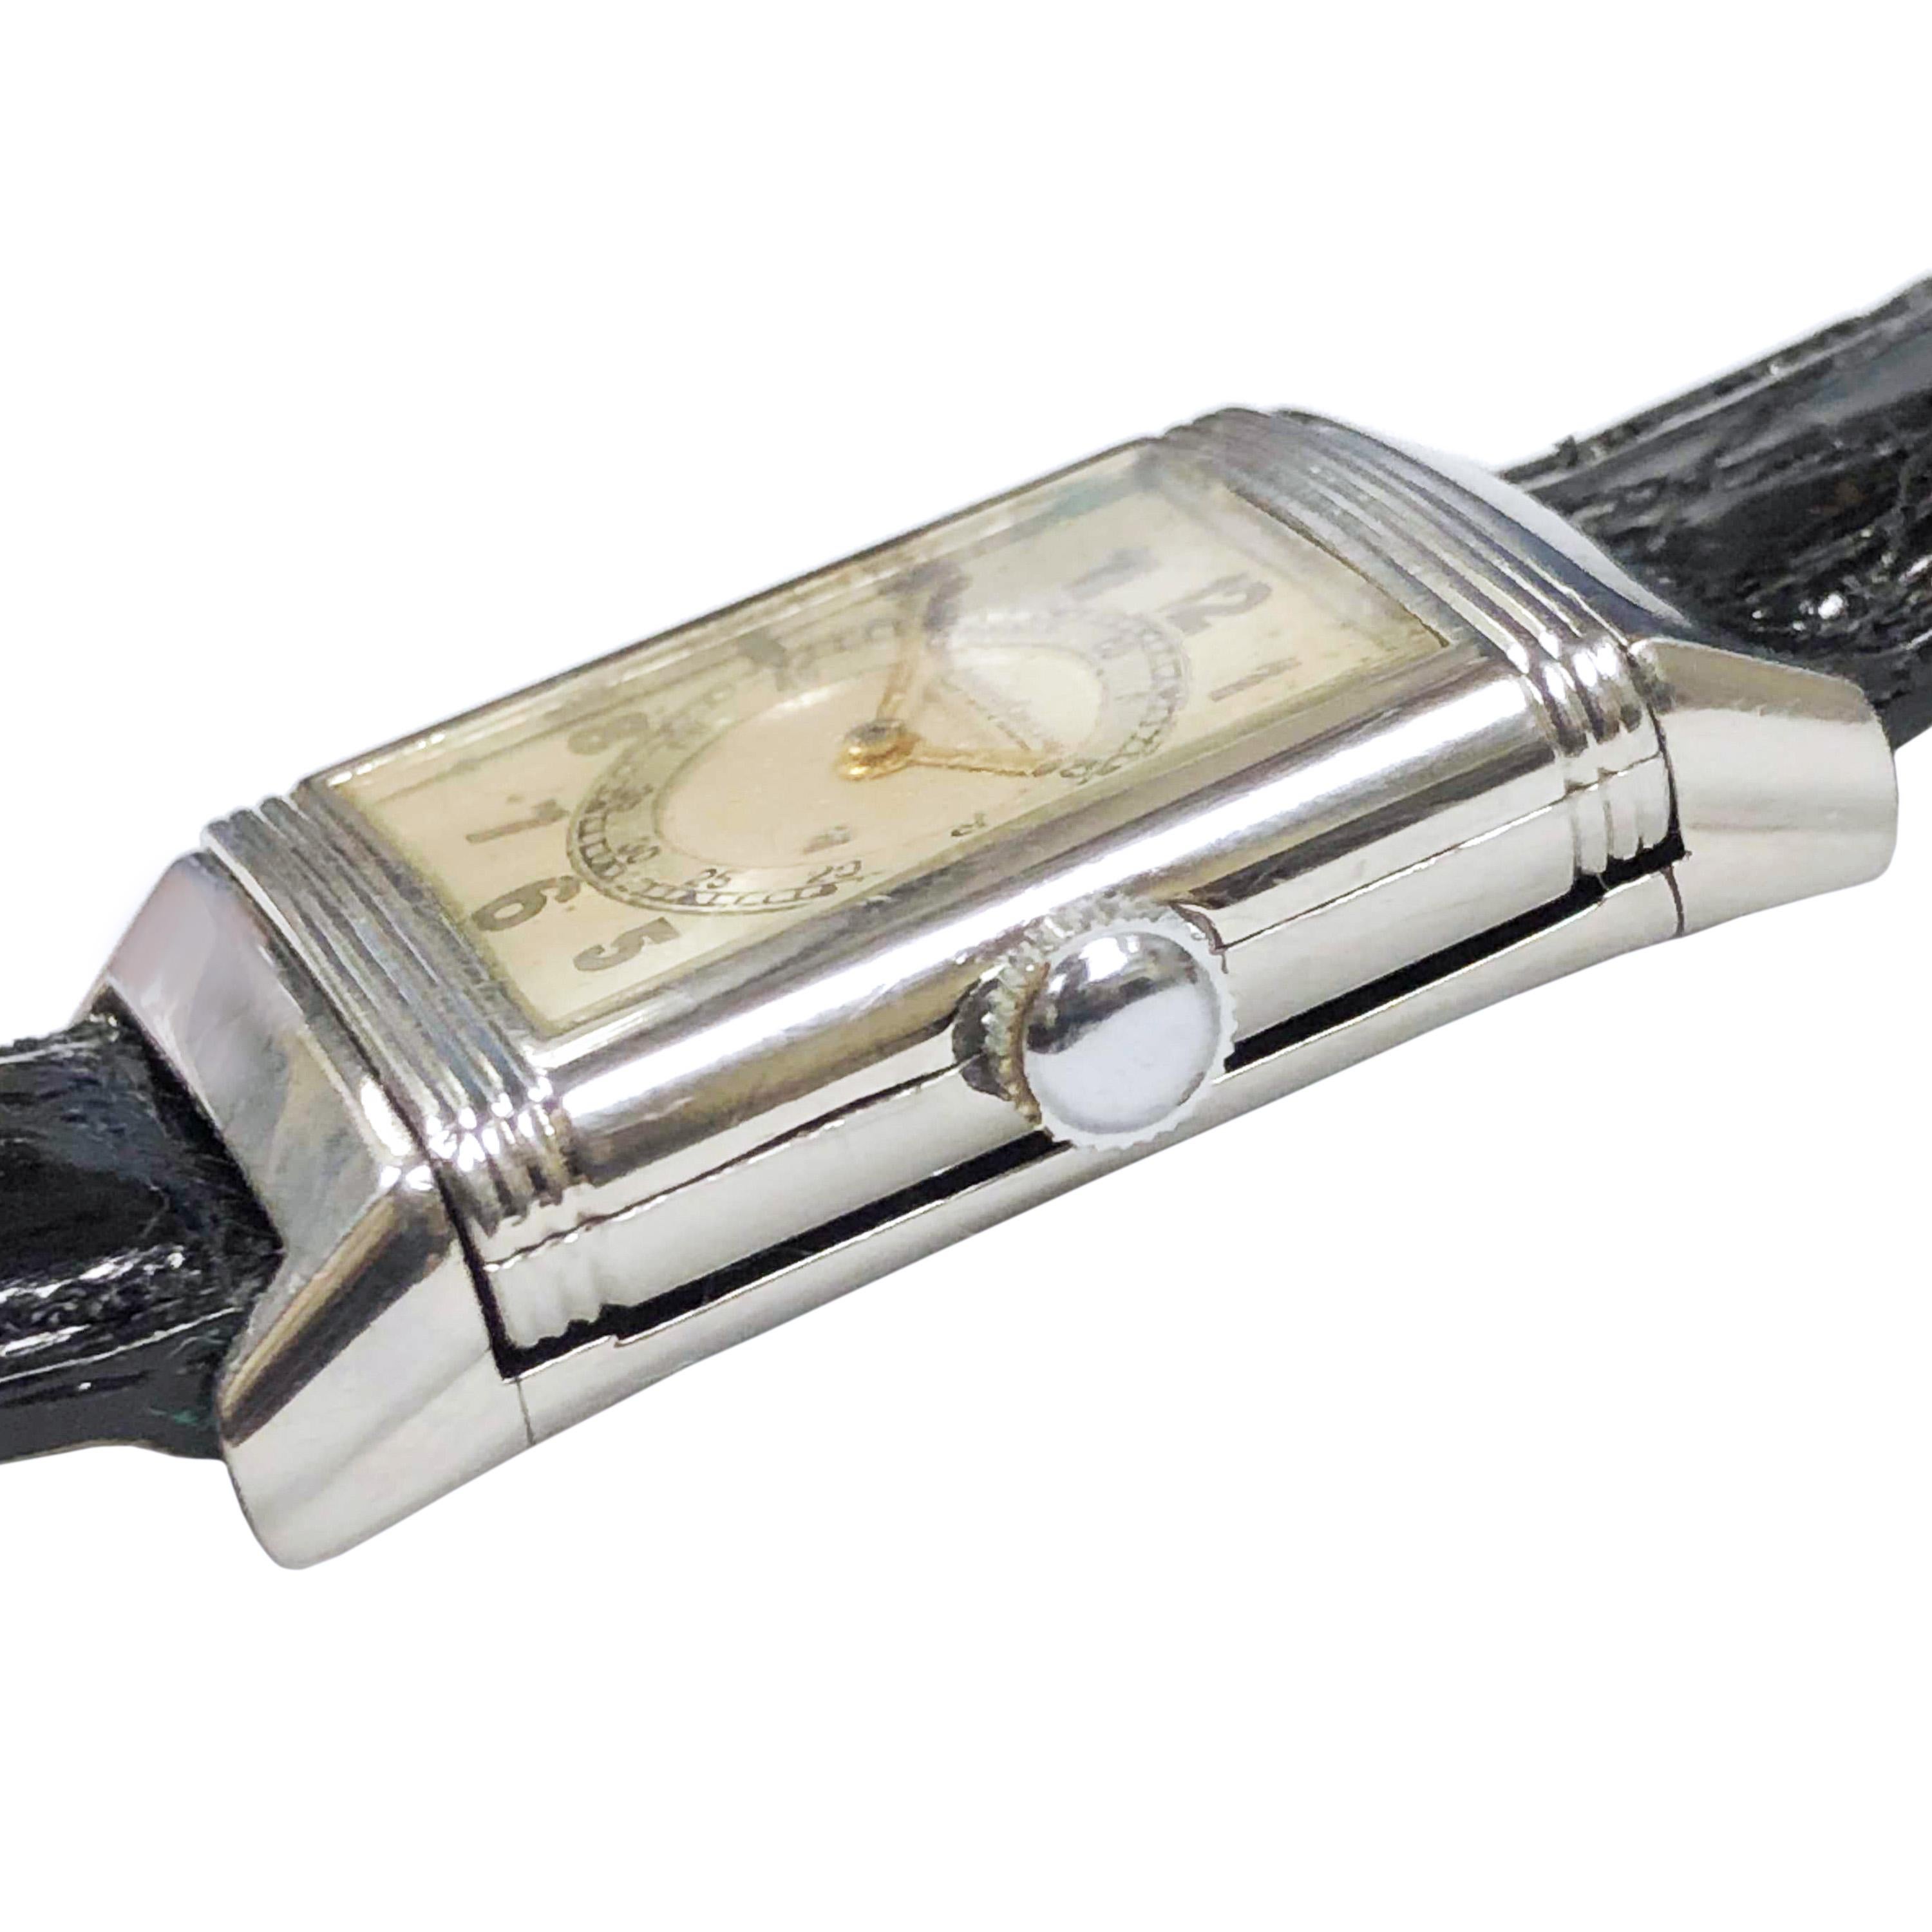 Circa 1930s Jaeger LeCoultre Reverso Wrist watch, 37 X 23 MM Stainless Steel Case that has never been engraved. 15 Jewel Mechanical, Manual wind movement. Original silvered dial with Luminous numbers. Black Crocodile Strap. A very fine example of an